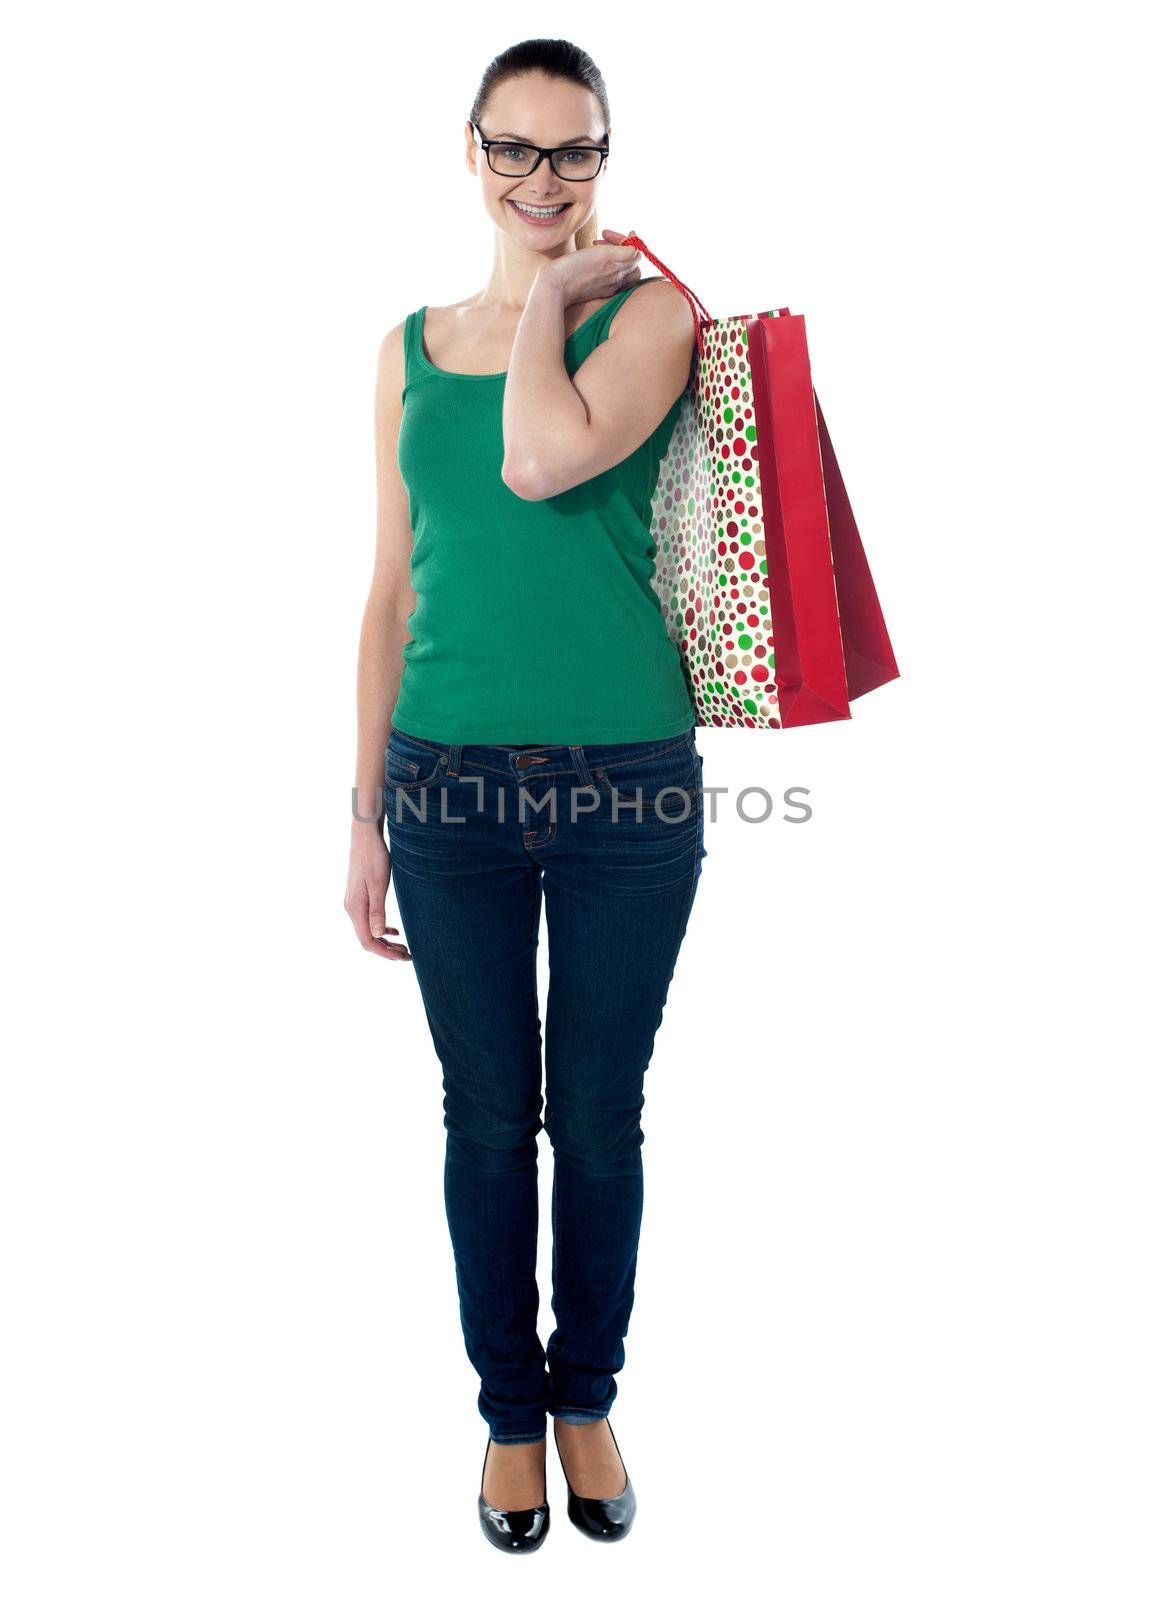 Beautiful woman holding shopping bags on her shoulders, smiling at camera